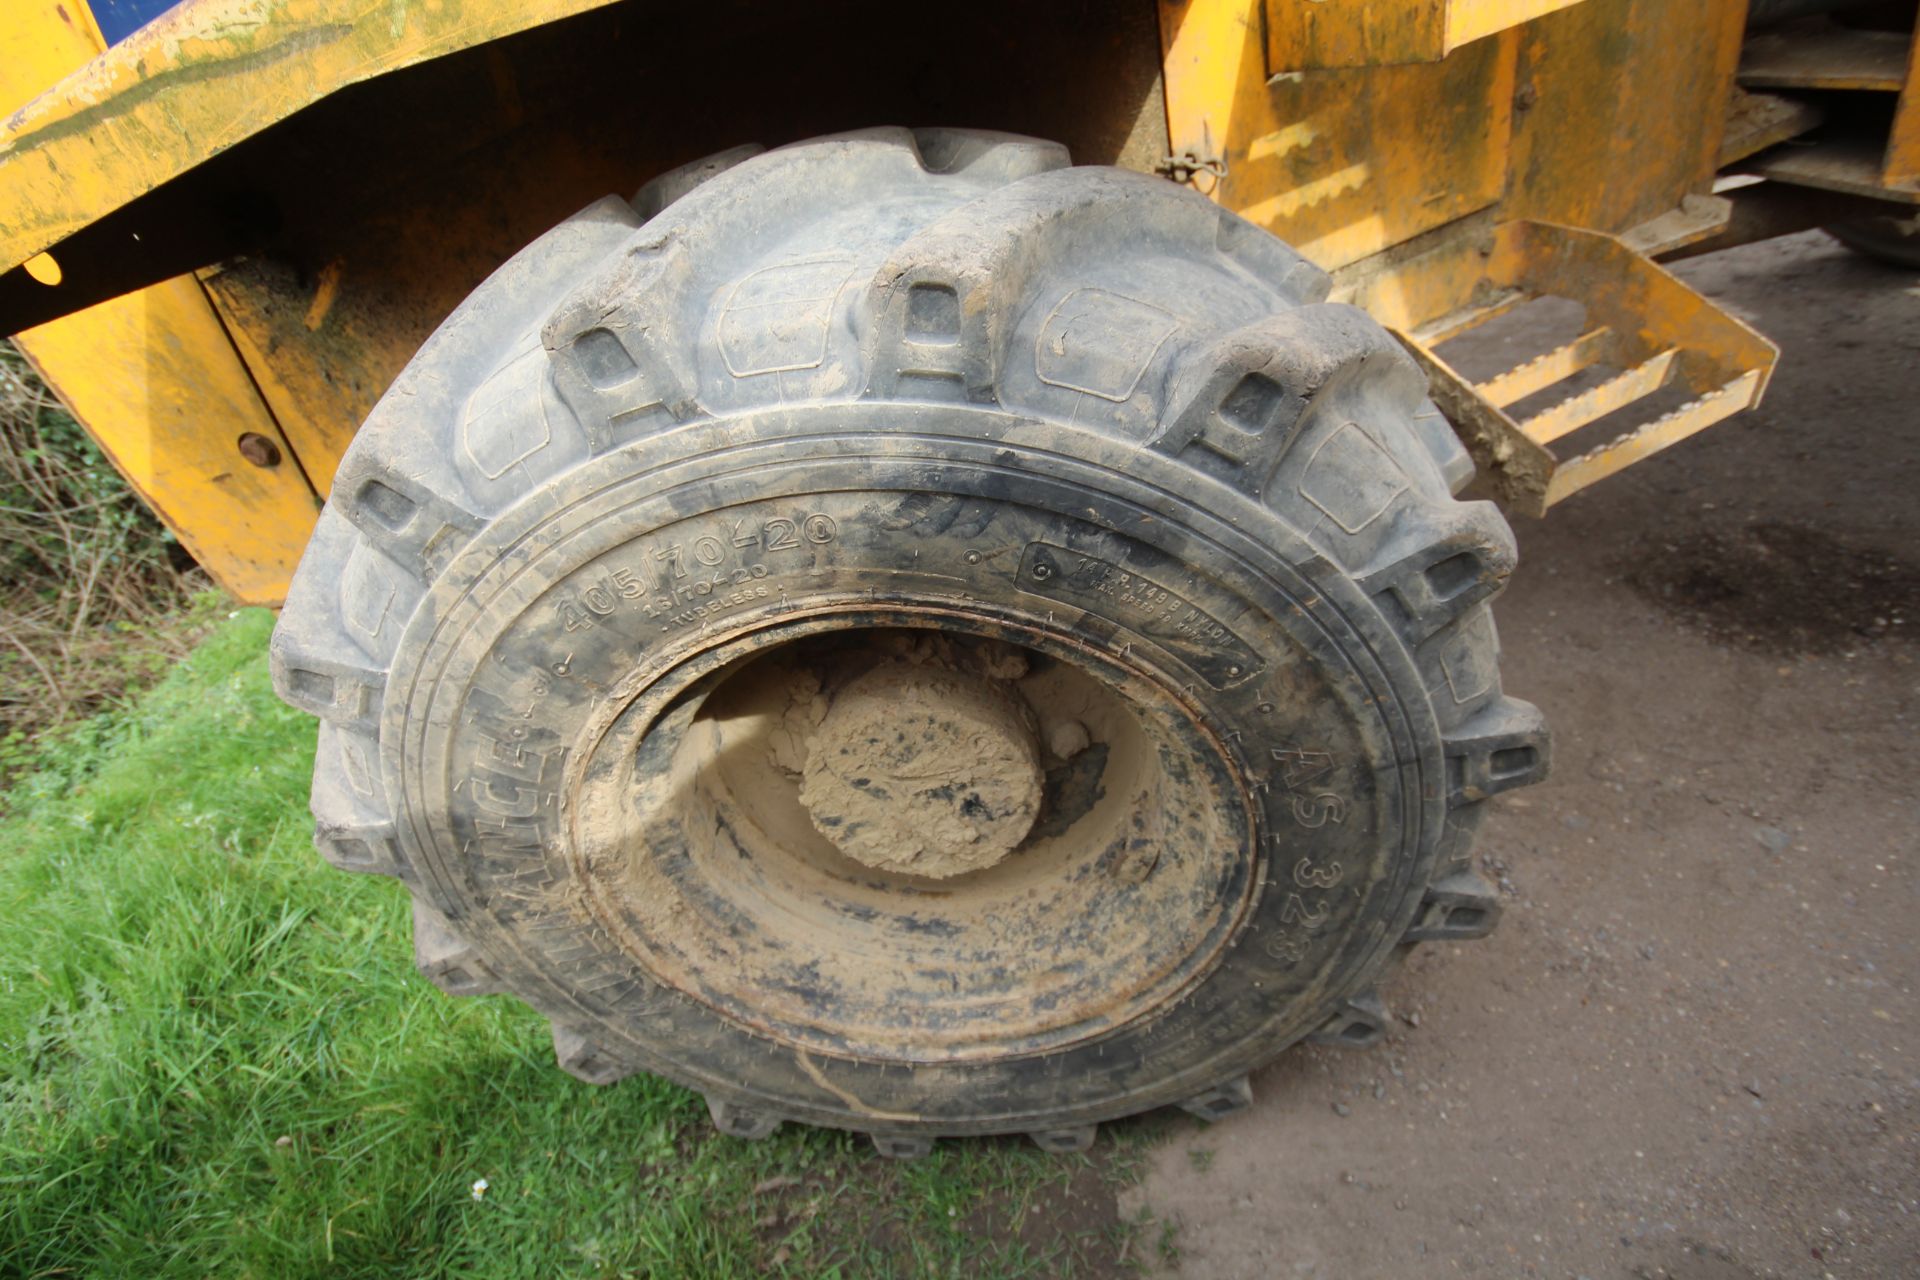 Thwaites 6T 4WD dumper. 2007. 4,971 hours. Serial number SLCM565ZZ706B4658. 405/70-20 wheels and - Image 12 of 35